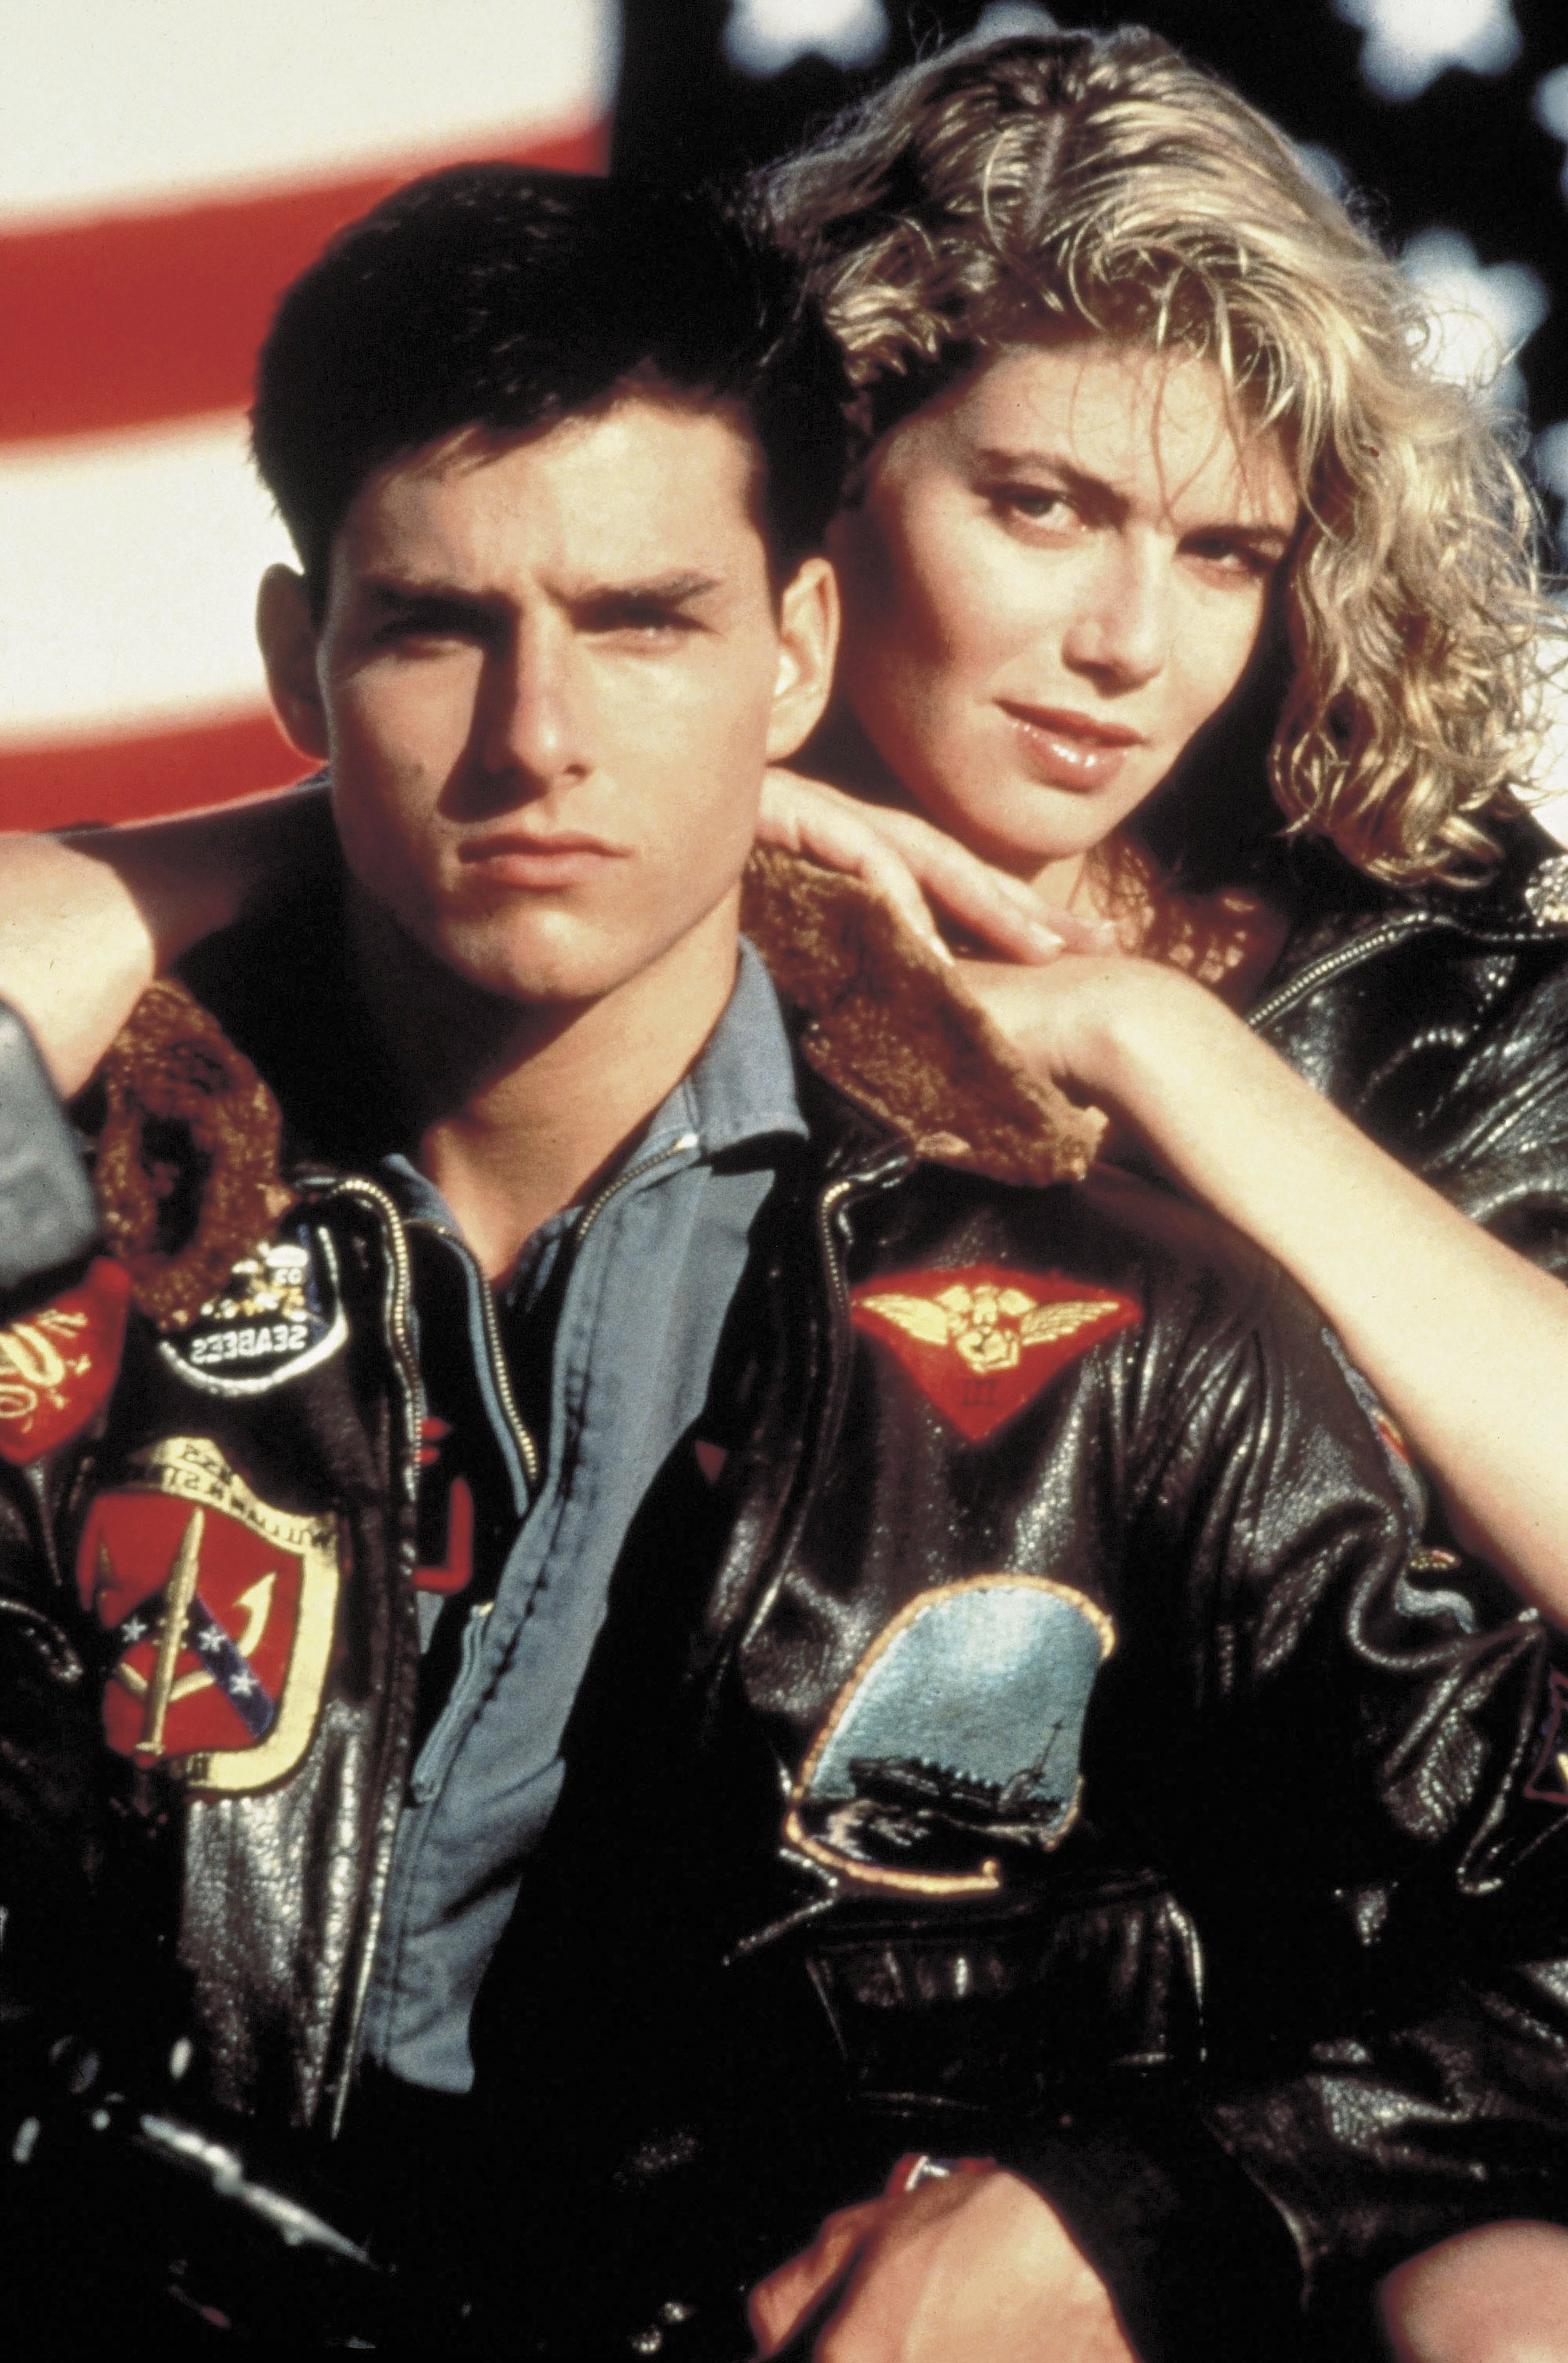 Tom Cruise and Kelly McGillis in a scene from "Top Gun" in 1986 | Source: Getty Images